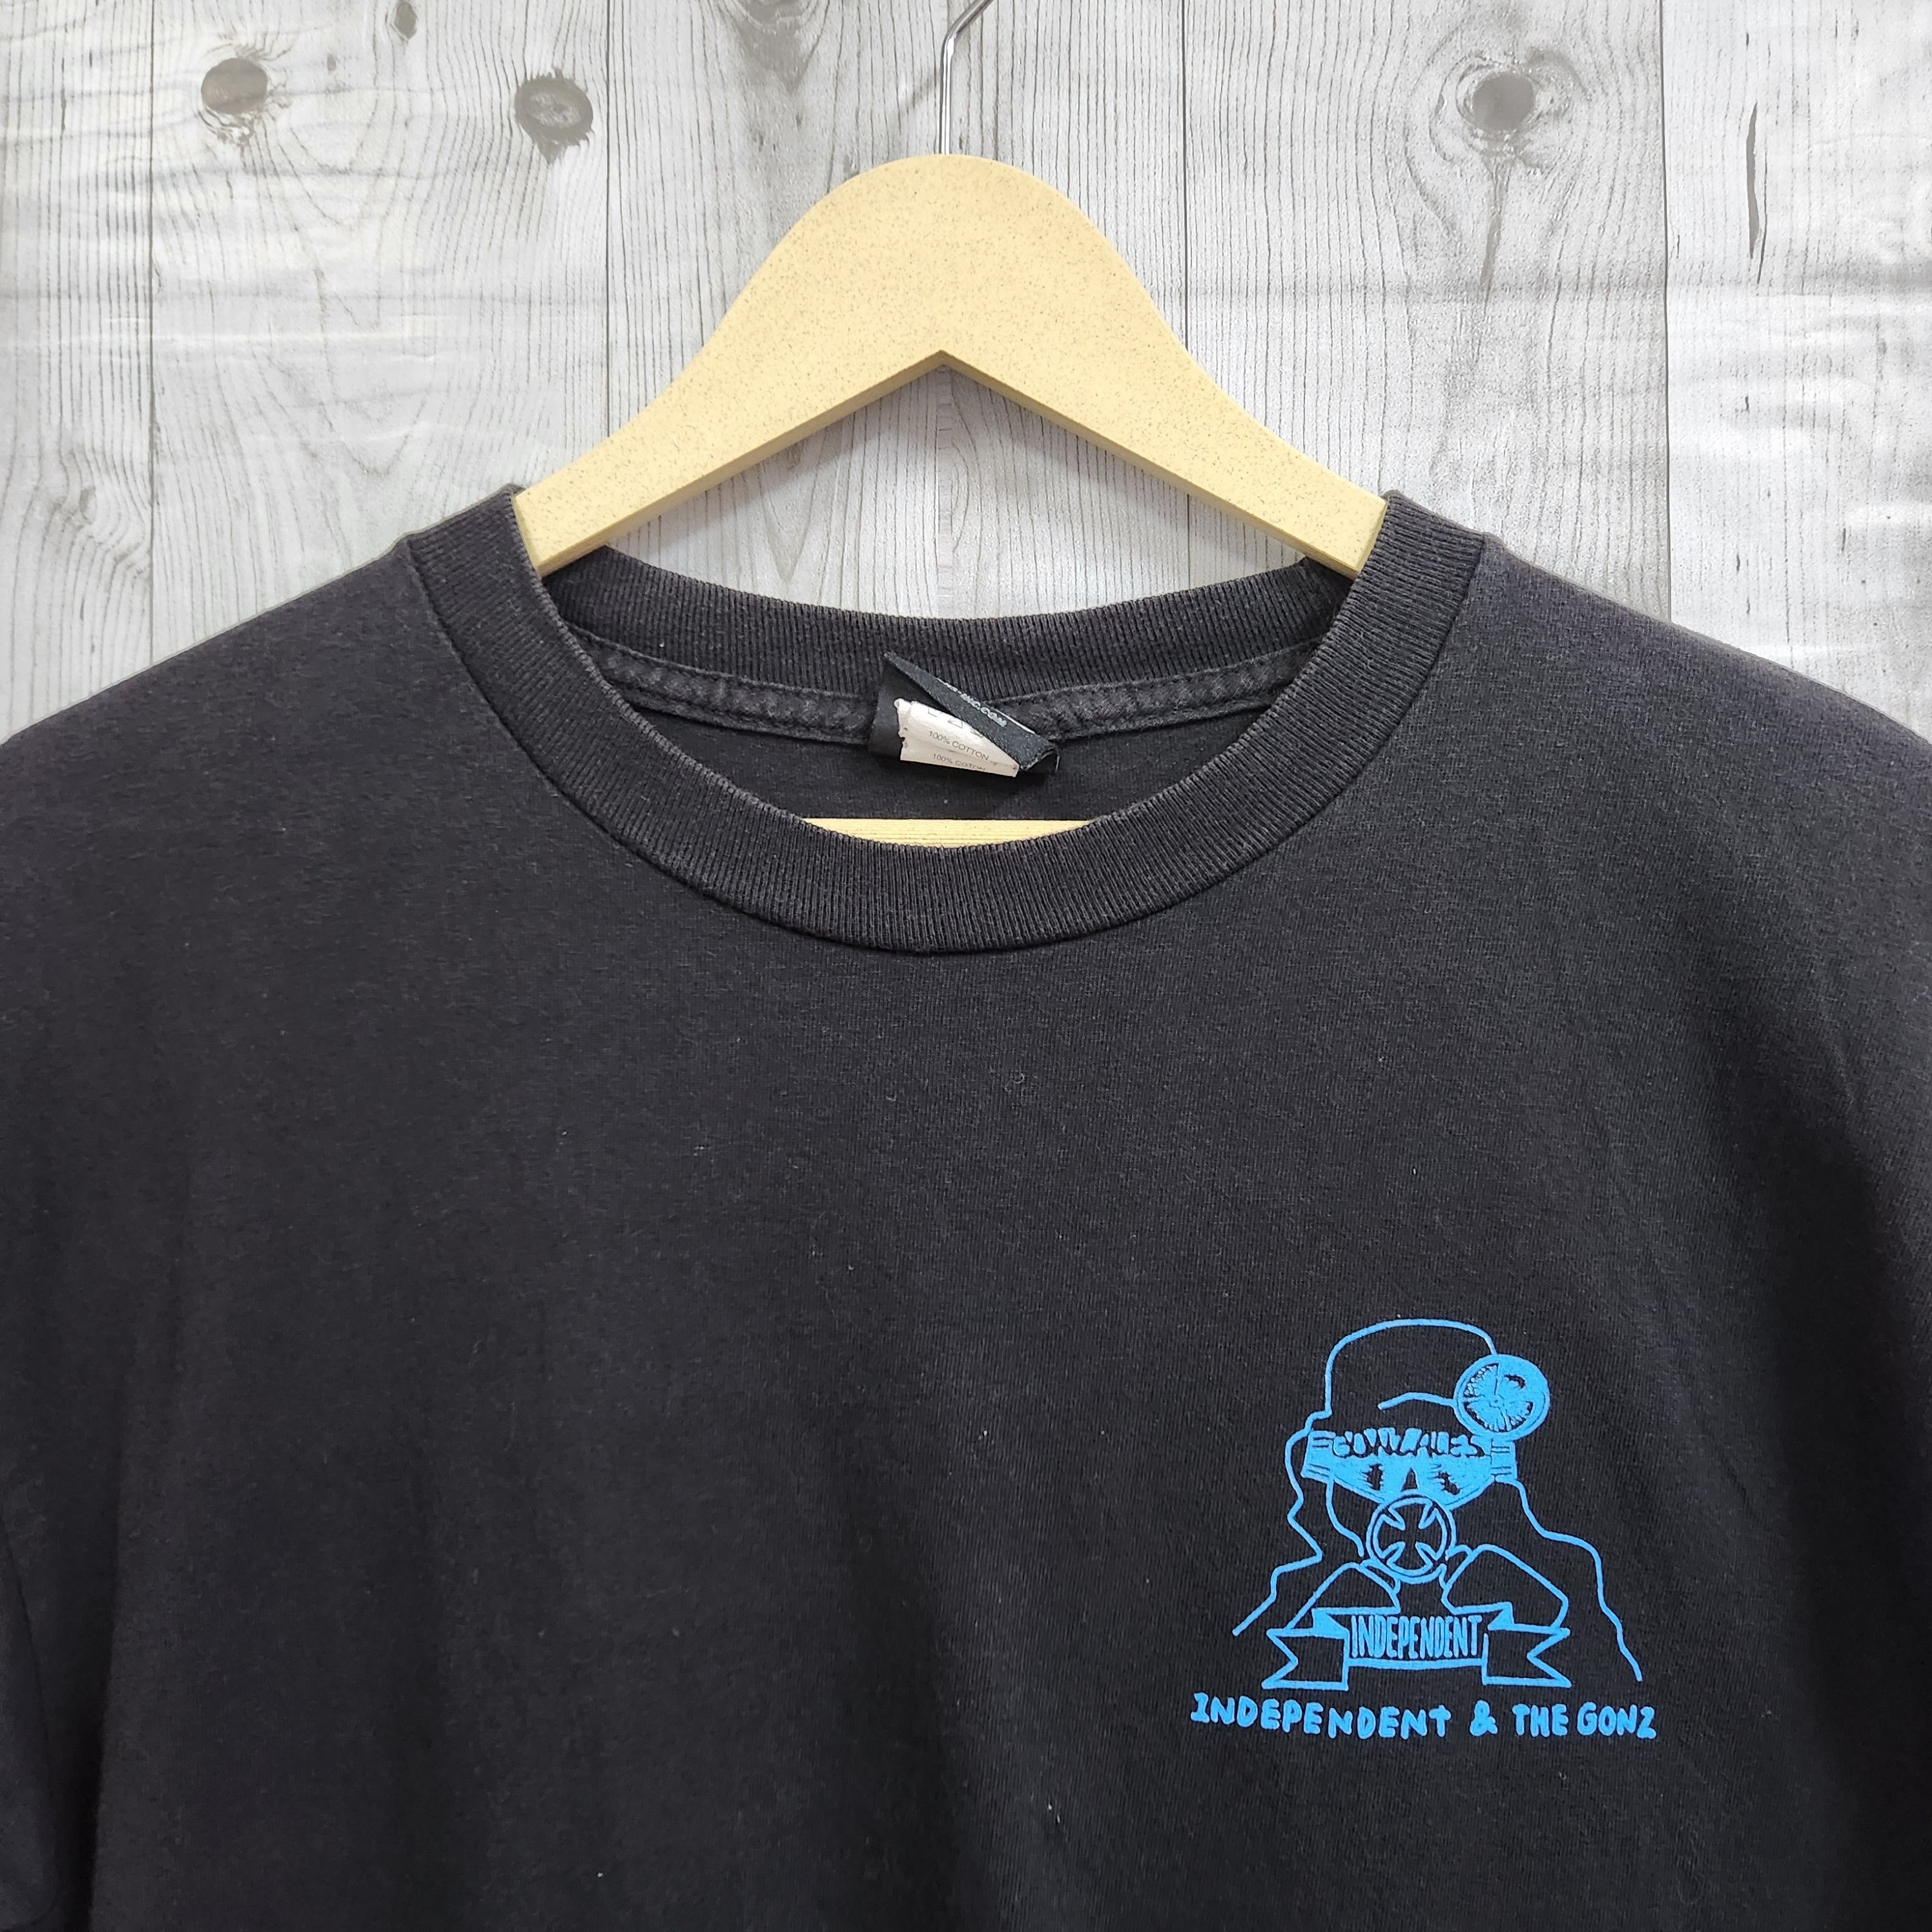 Independent Truck Co. - Independent X The Gonz Skategang Streetwear Tees - 15